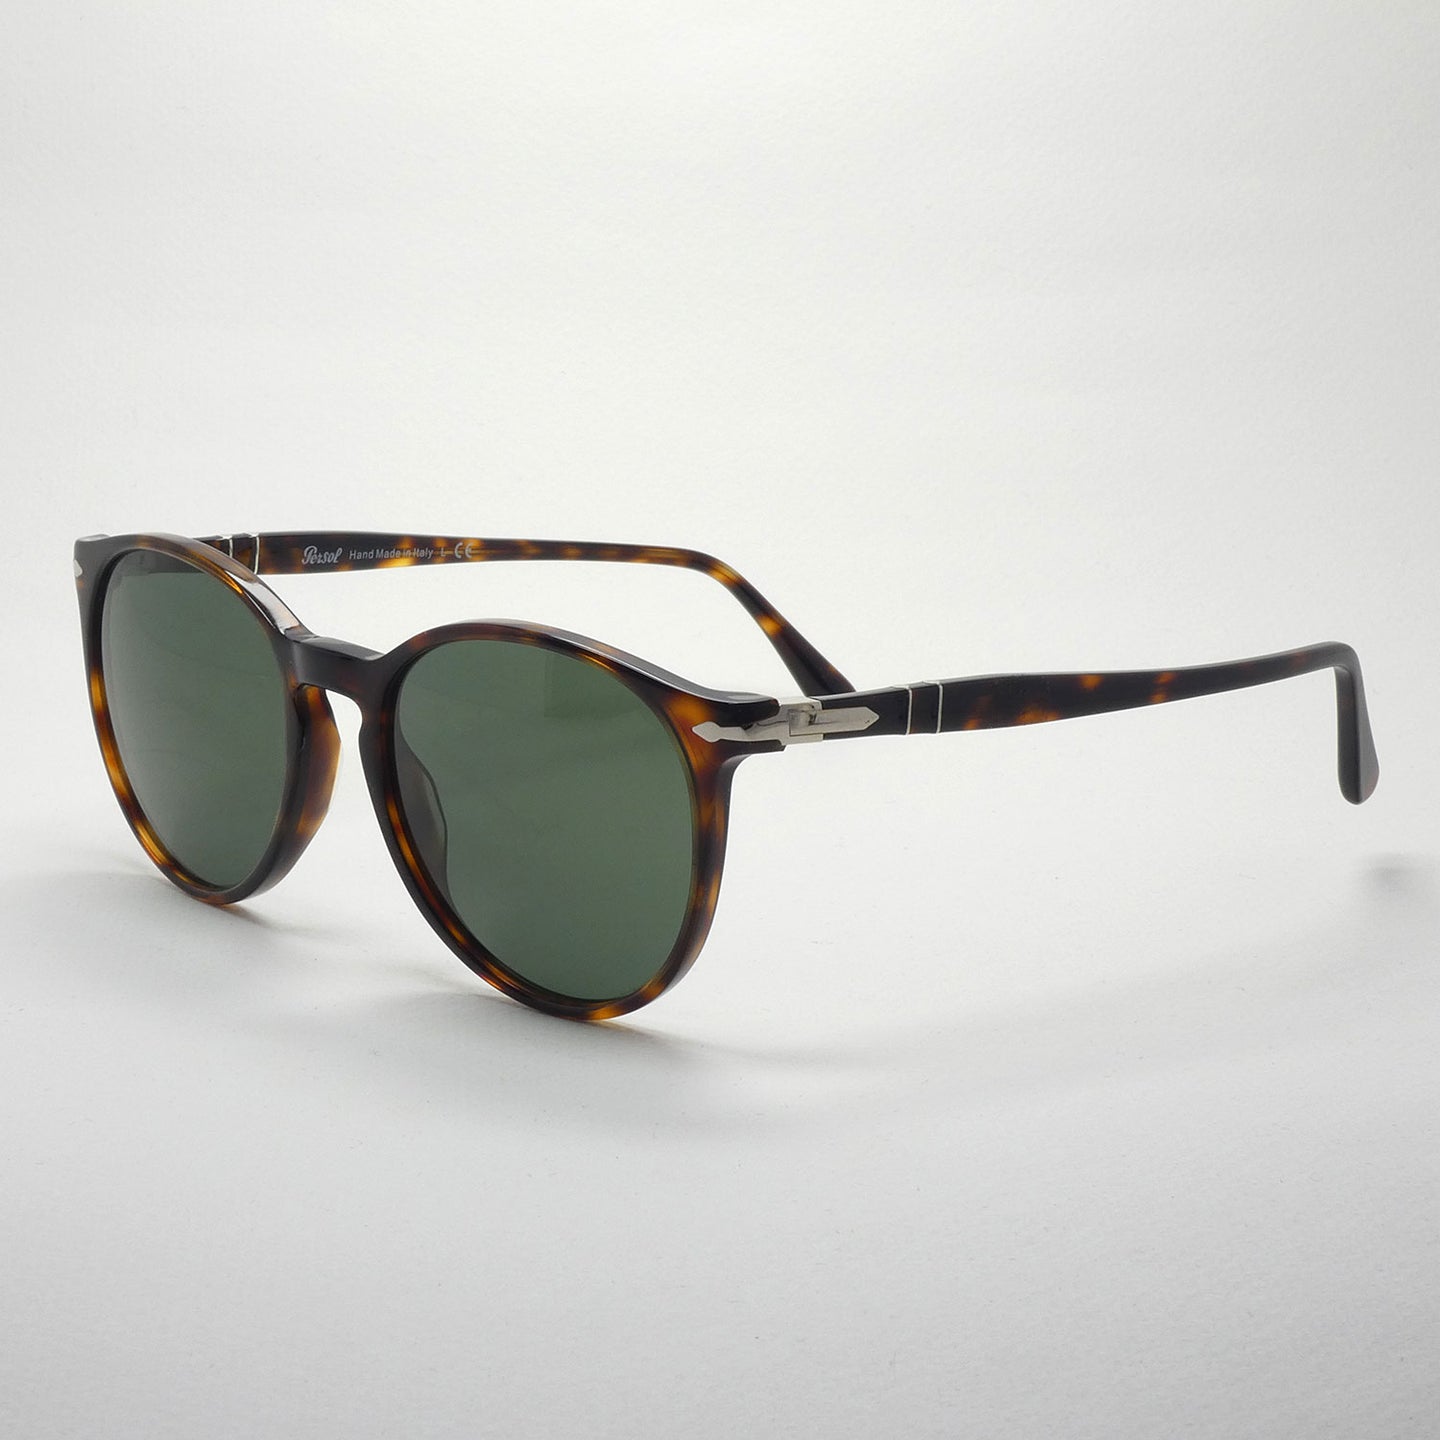 sunglasses persol 3228 24/31 size 53 angled view